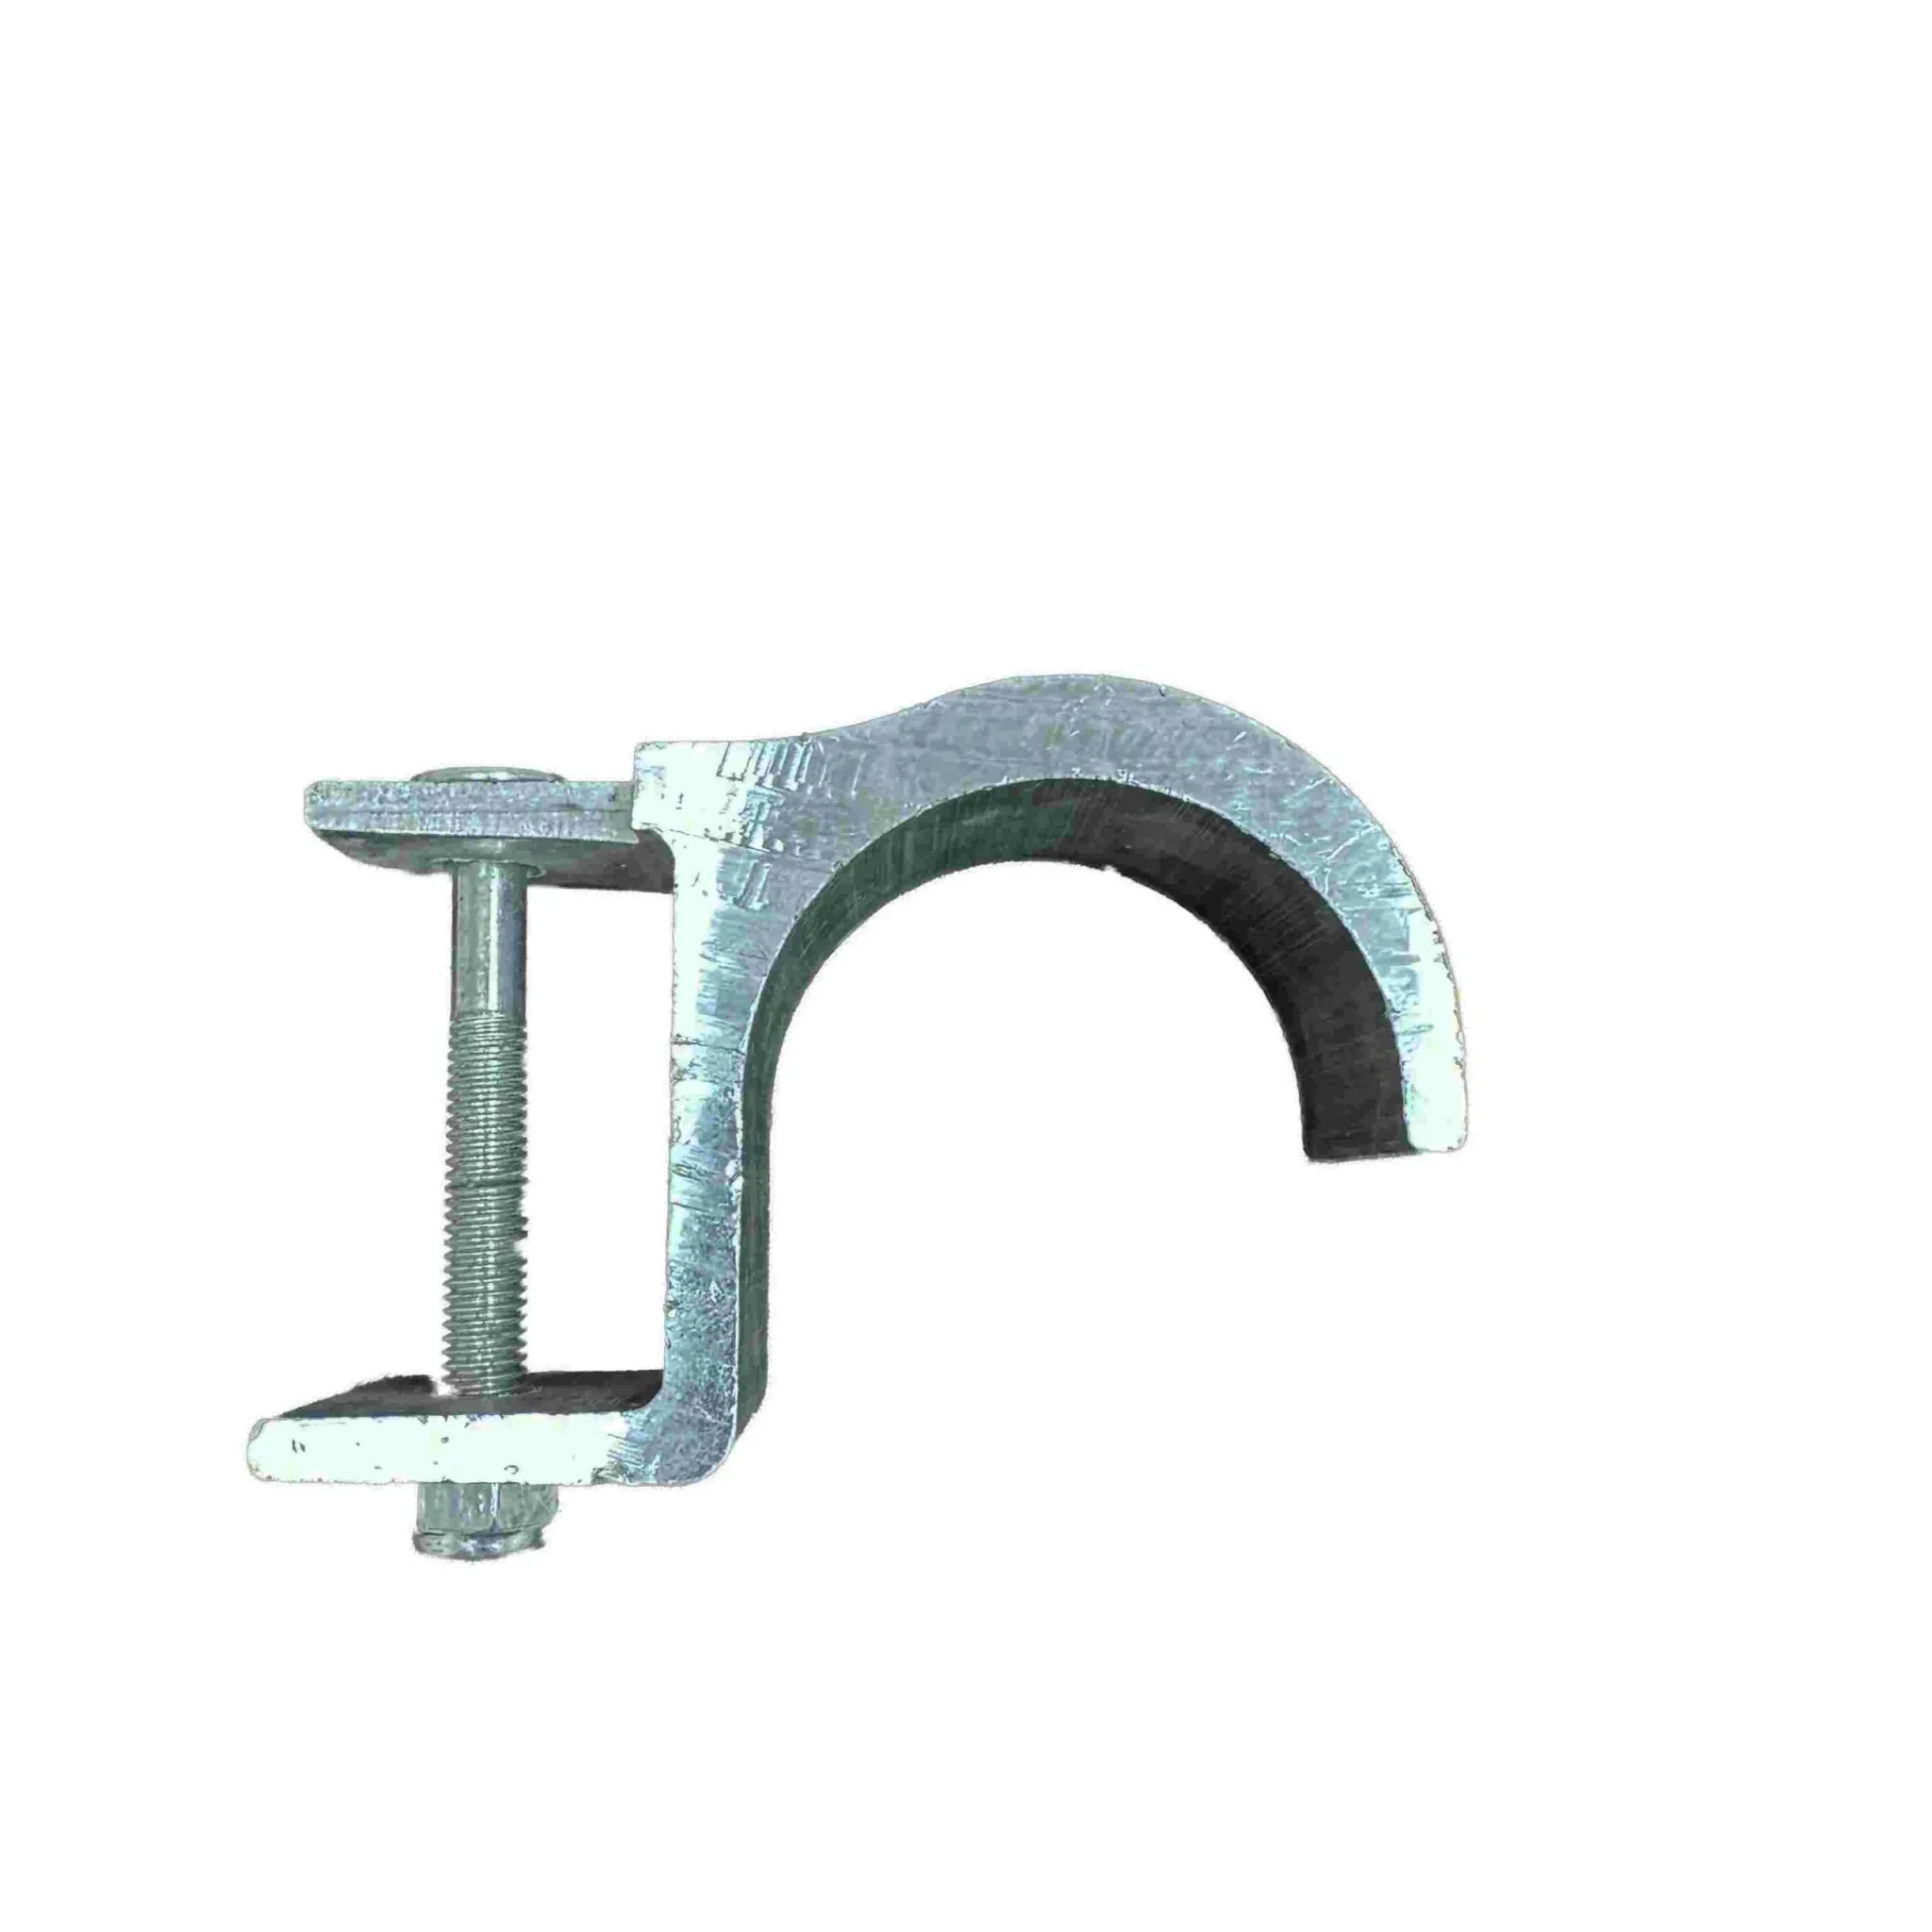 Replacement Hook for Aluminum Scaffold team809